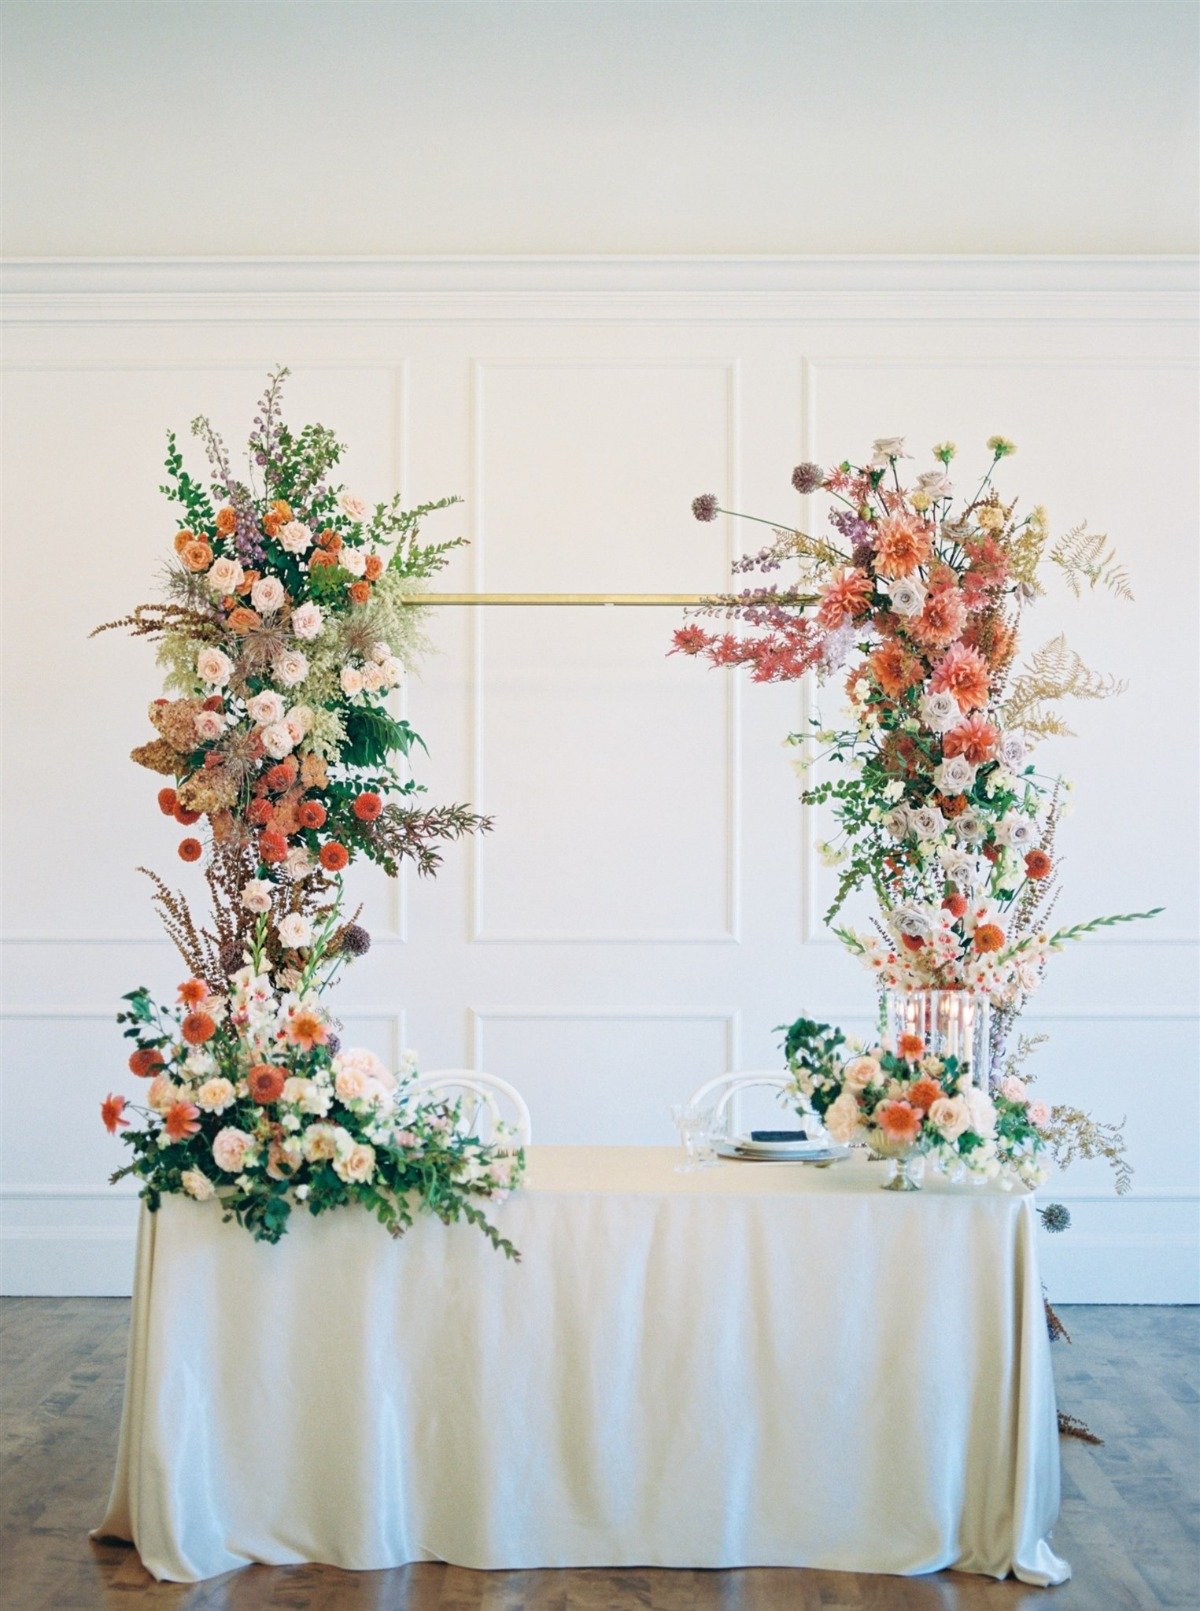 How to reuse ceremony flowers at the reception